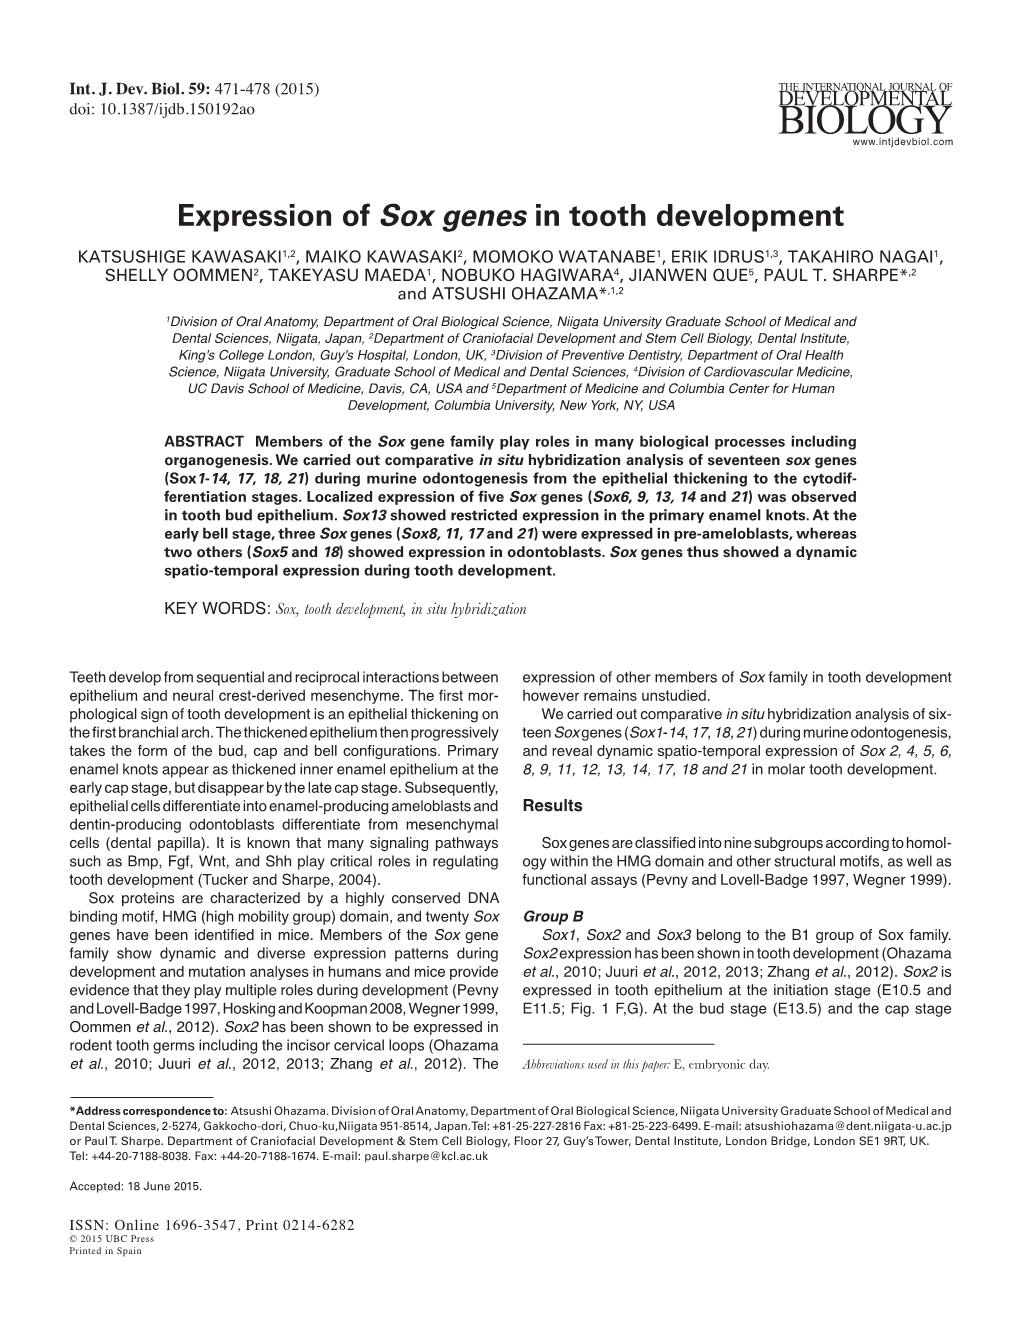 Expression of Sox Genes in Tooth Development